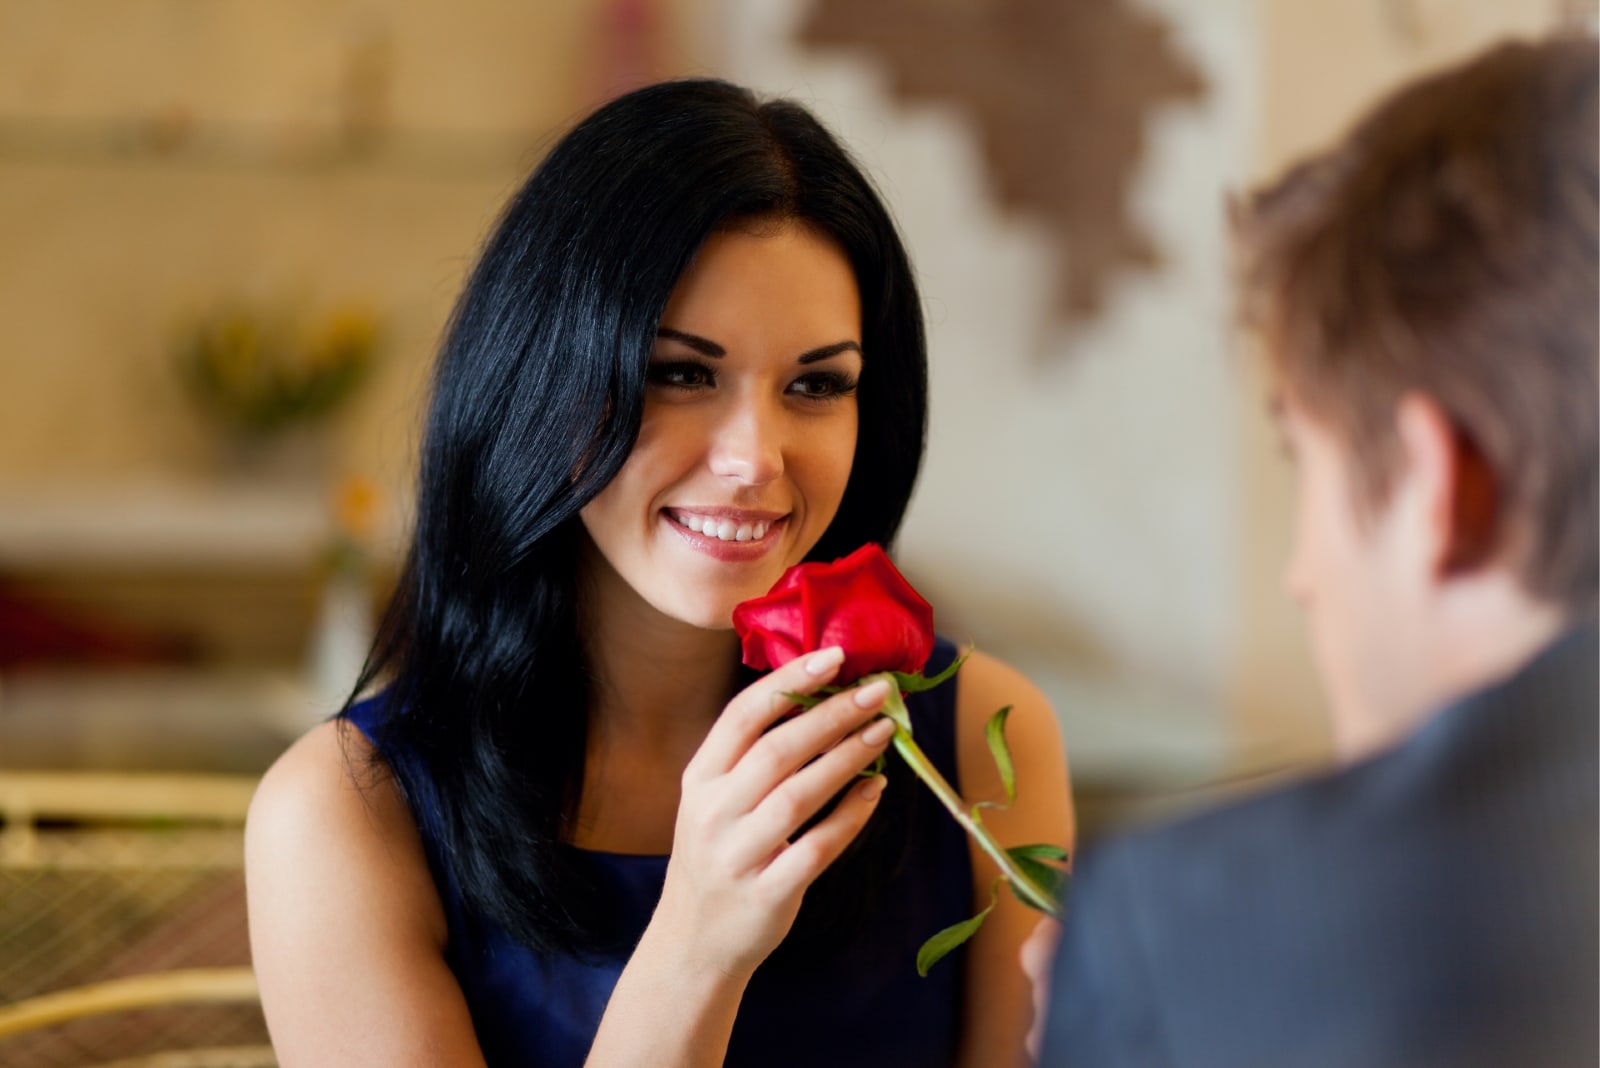 Problems with dating a beautiful woman